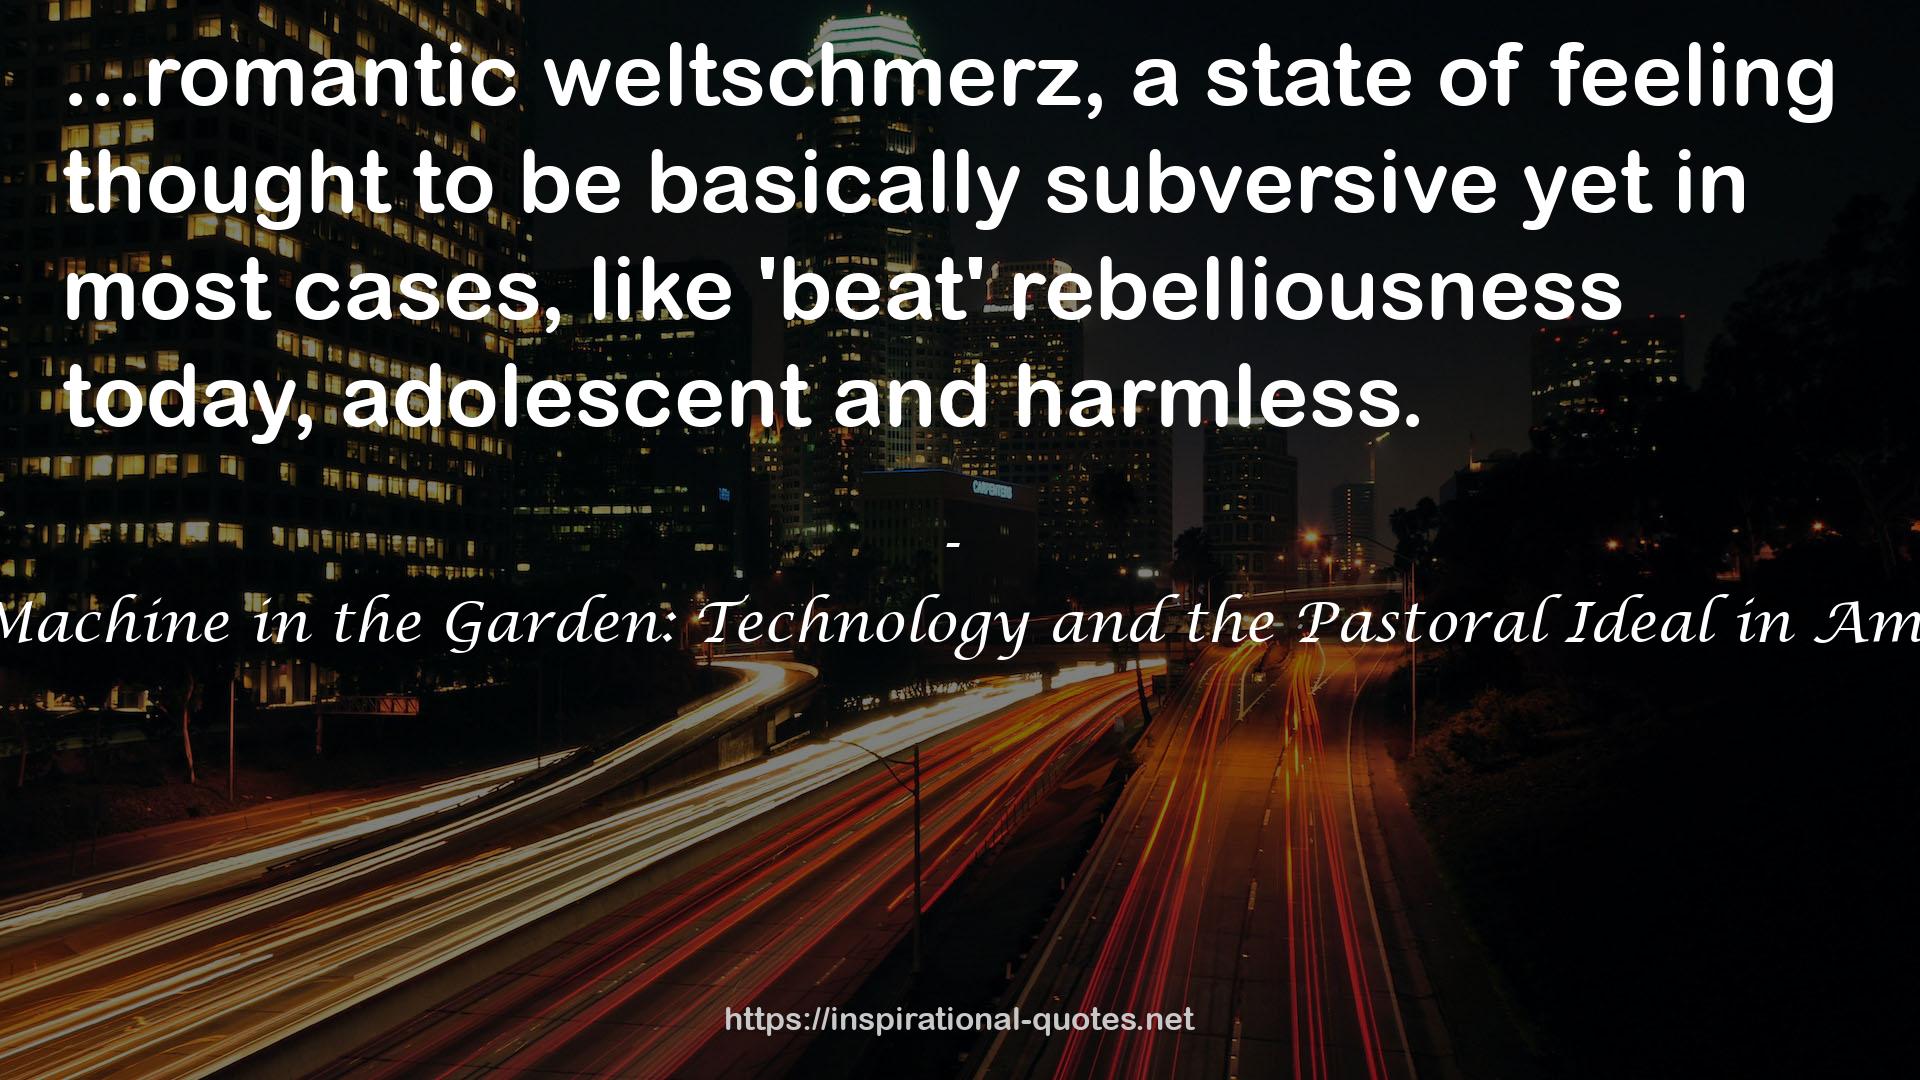 The Machine in the Garden: Technology and the Pastoral Ideal in America QUOTES